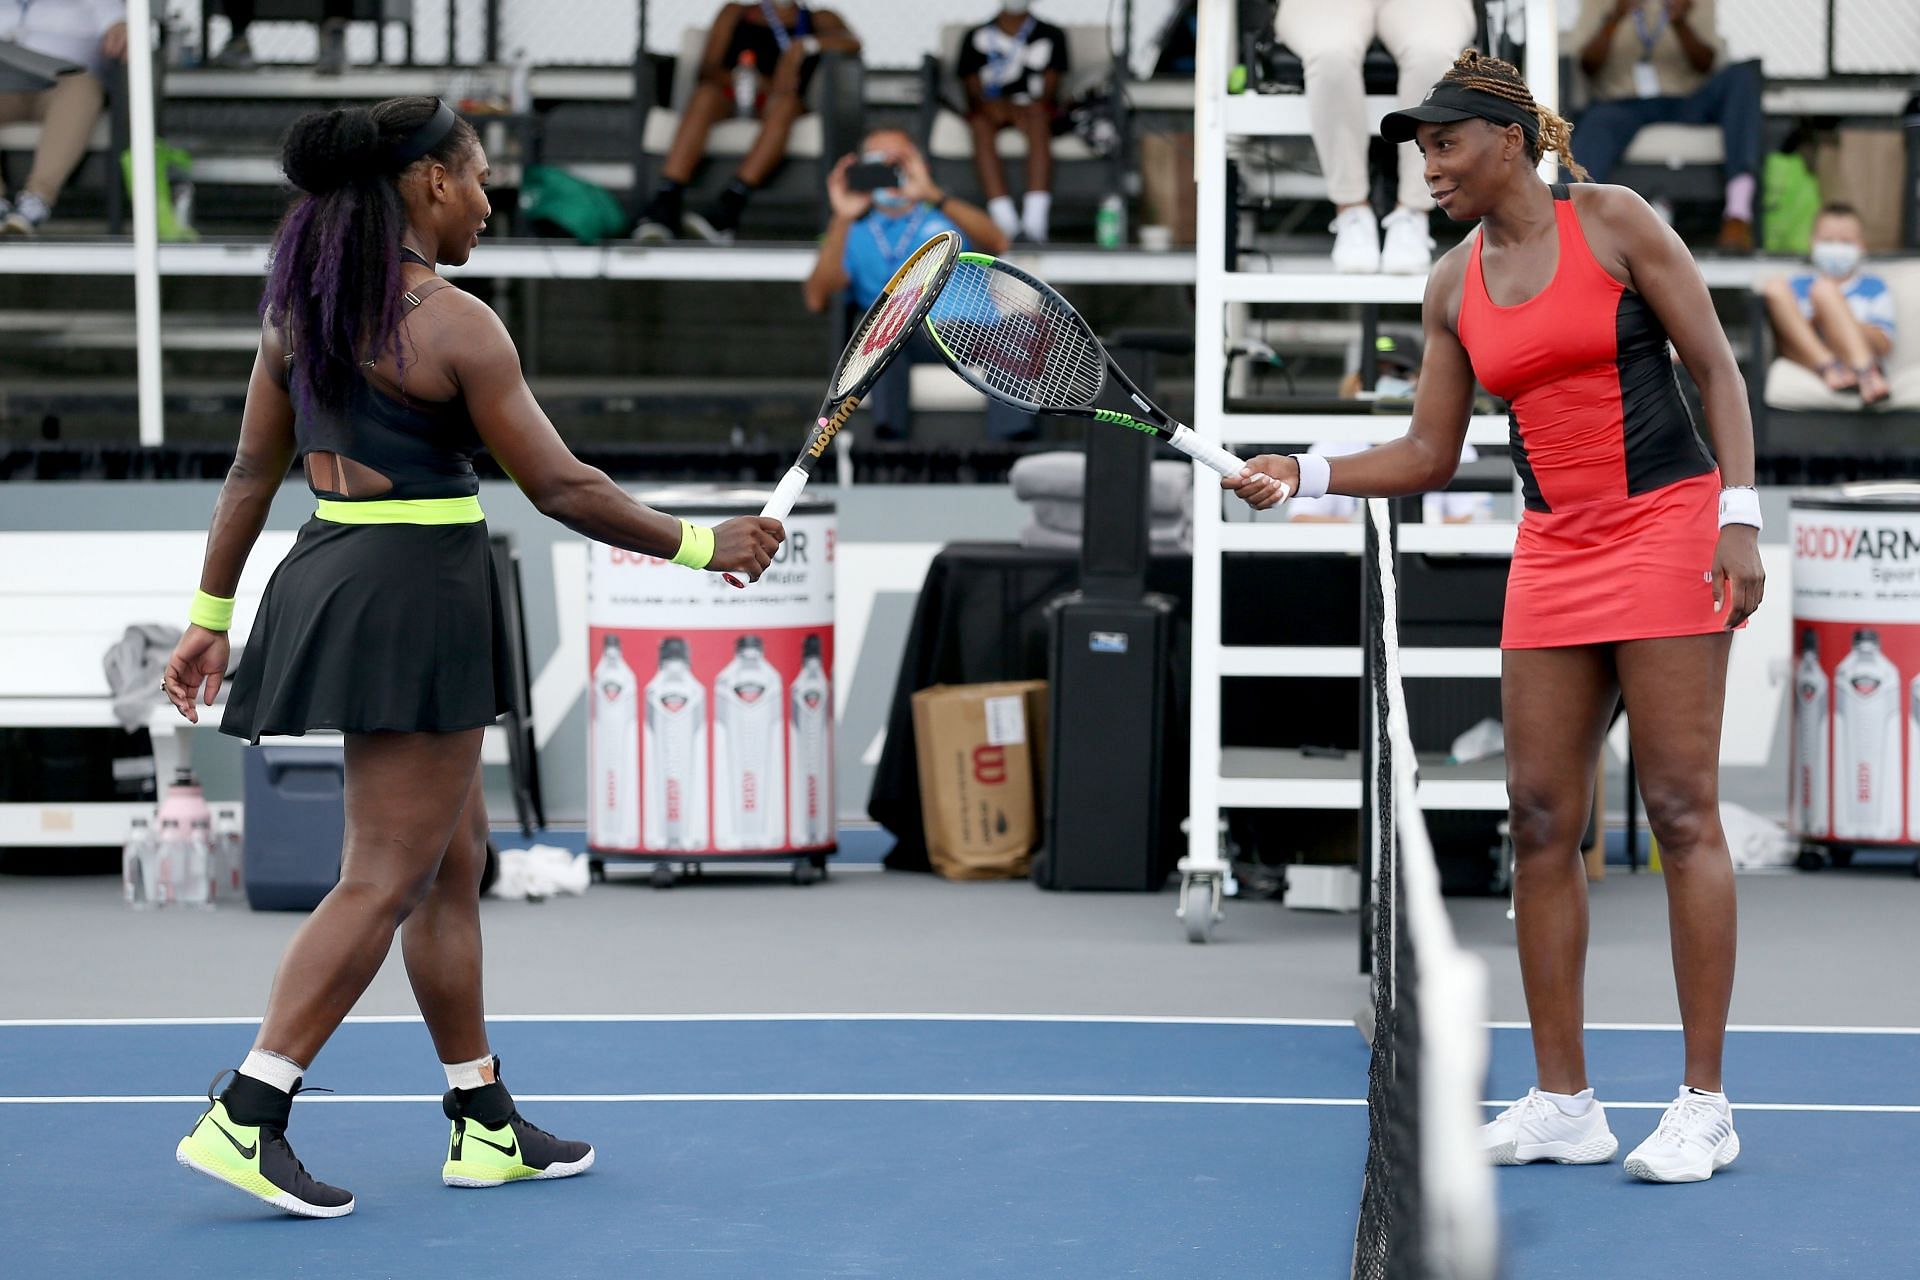 Venus and Serena Williams at the Top Seed Open 2020